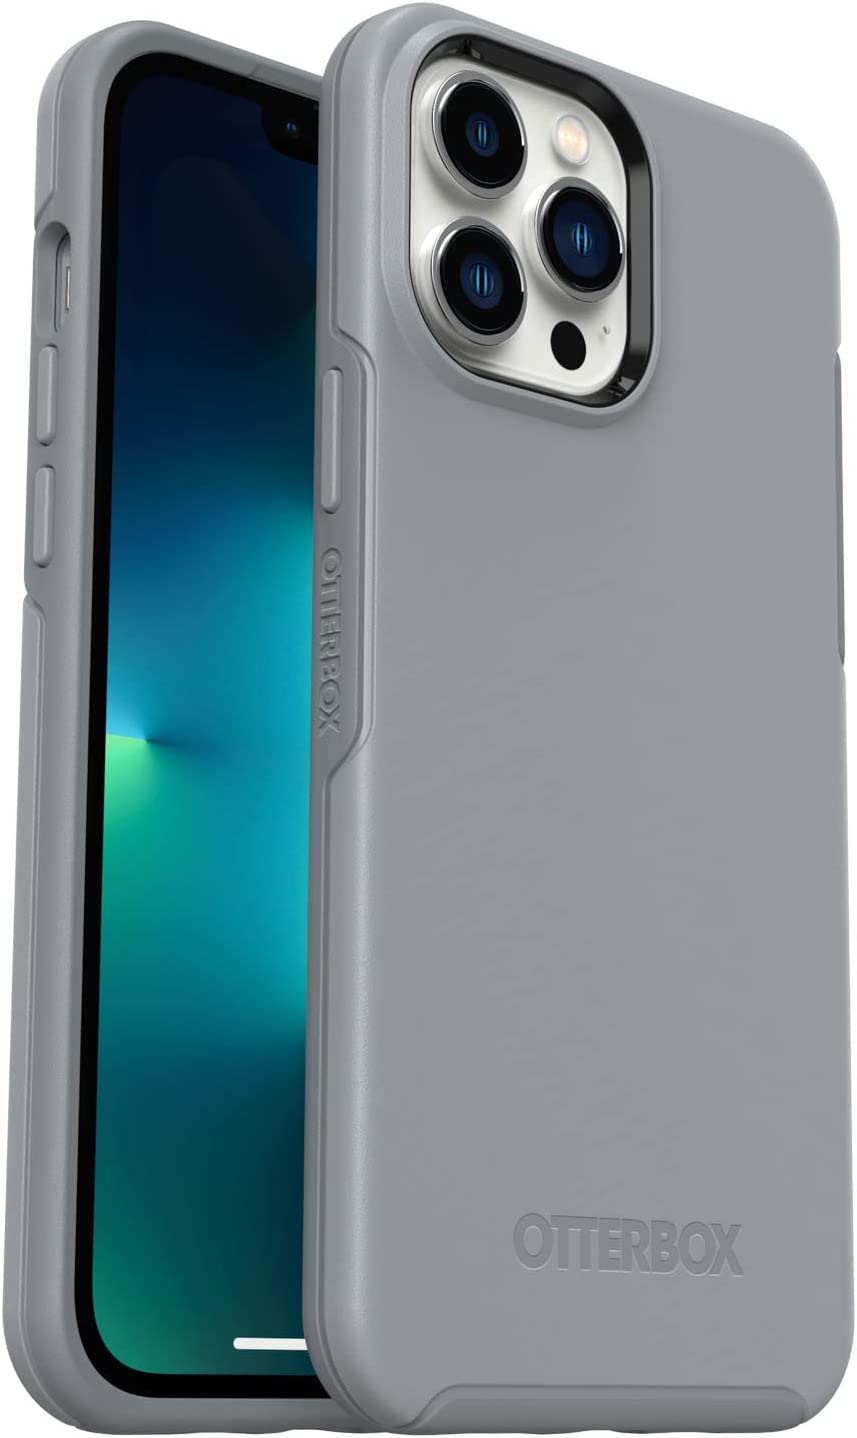 OtterBox SYMMETRY SERIES Case for iPhone 13 Pro Max / 12 Pro Max-Resilience Grey (Certified Refurbished)